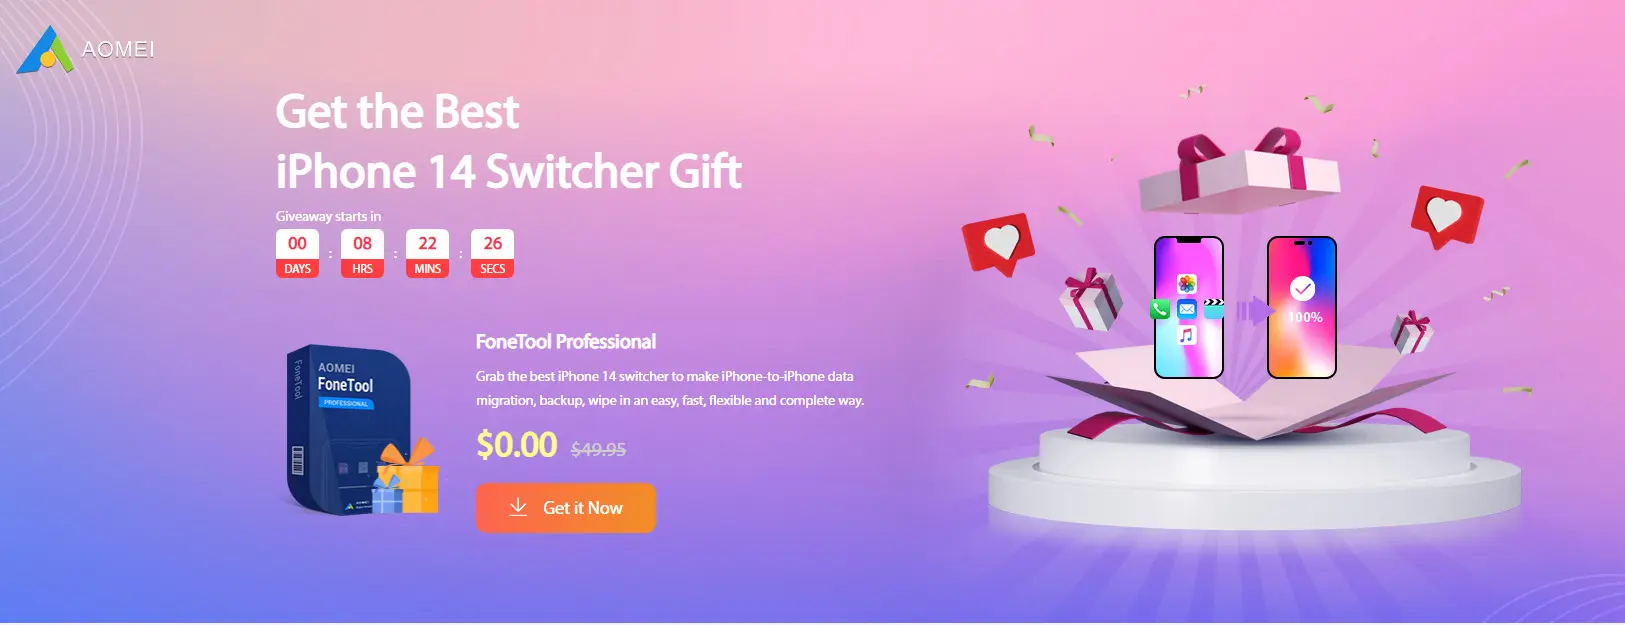 fonetool giveaway transfer to new iphone 14 with the best switcher gift 1